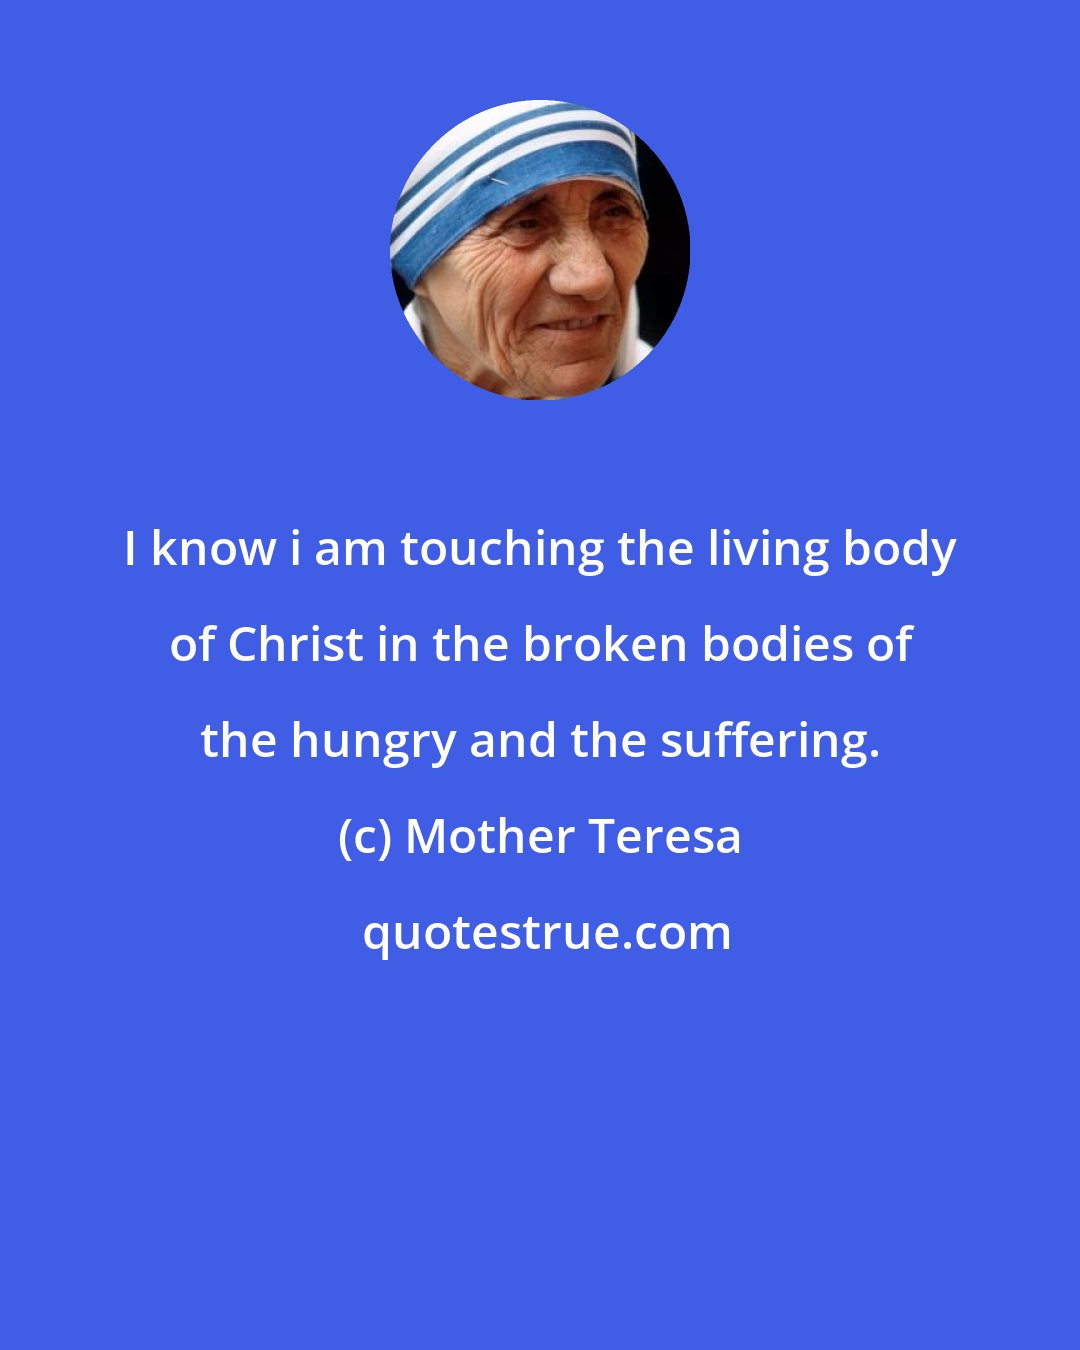 Mother Teresa: I know i am touching the living body of Christ in the broken bodies of the hungry and the suffering.